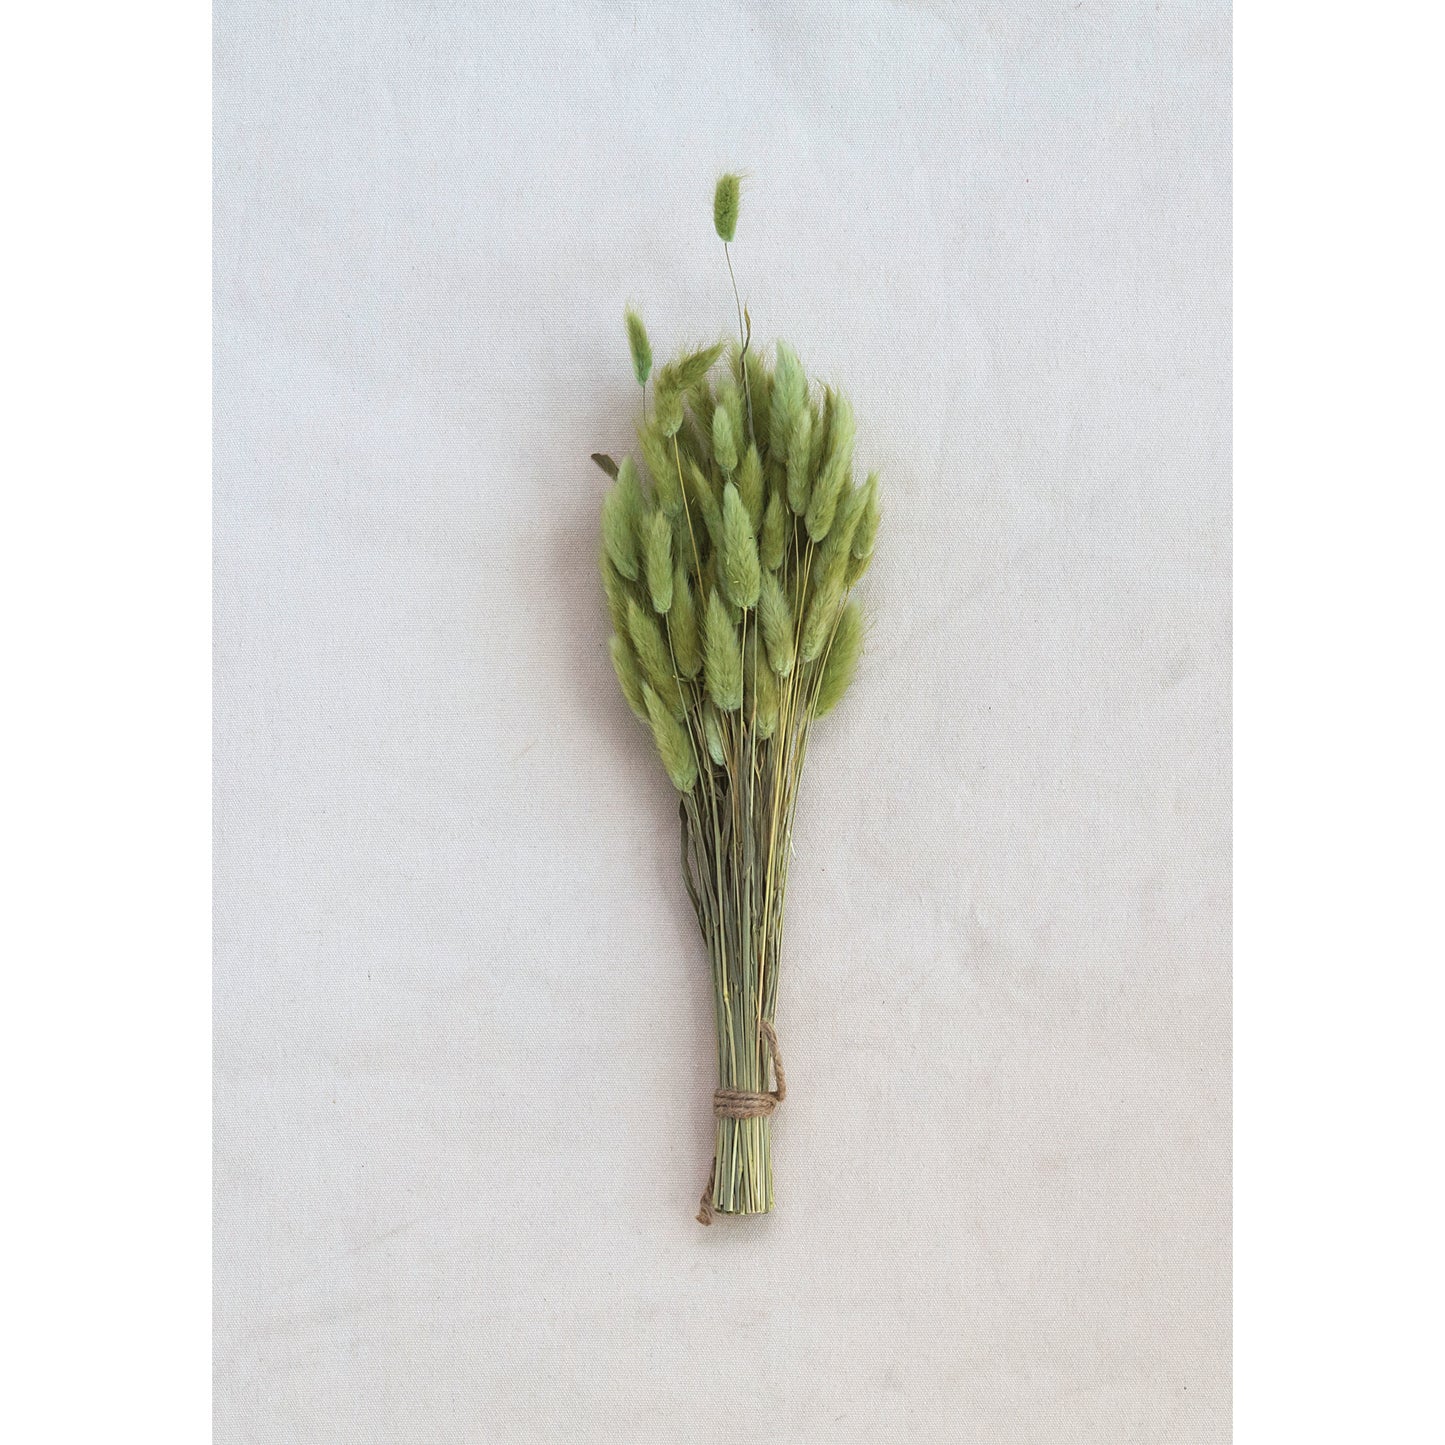 Stem-Dried Natural Bunny Tail Grass